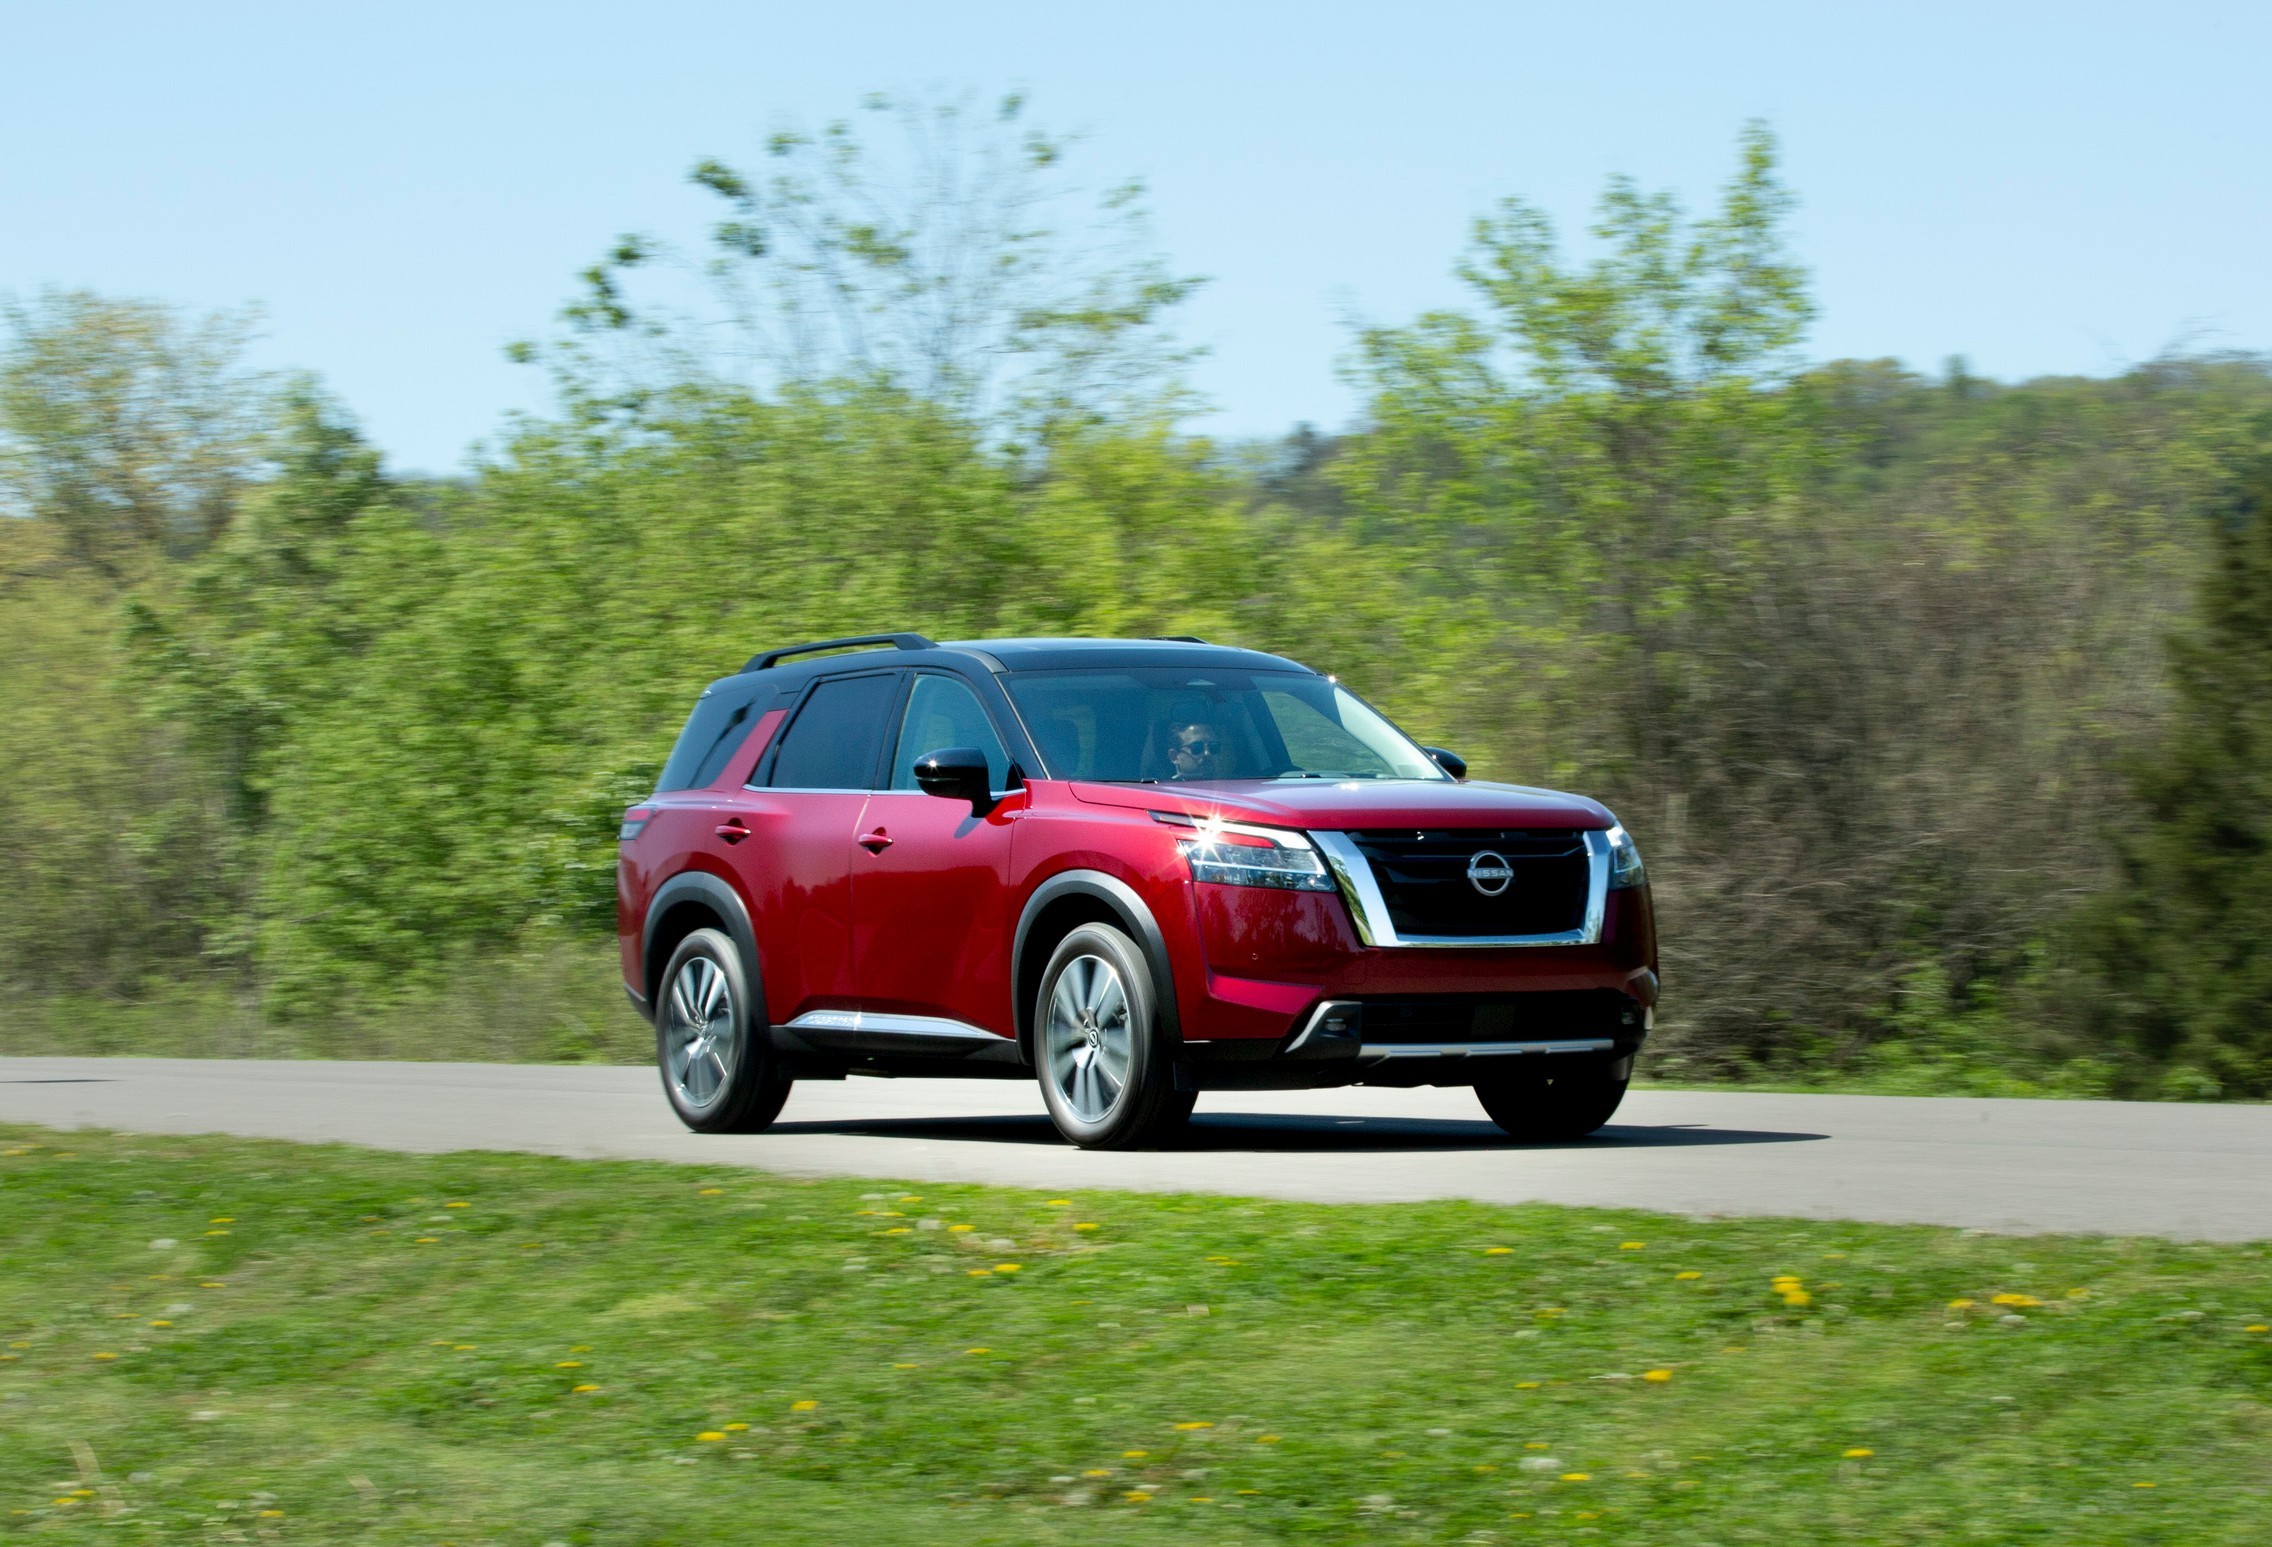 2022 Nissan Pathfinder Offers Up to 6,000 Lbs Towing Capacity, Starts